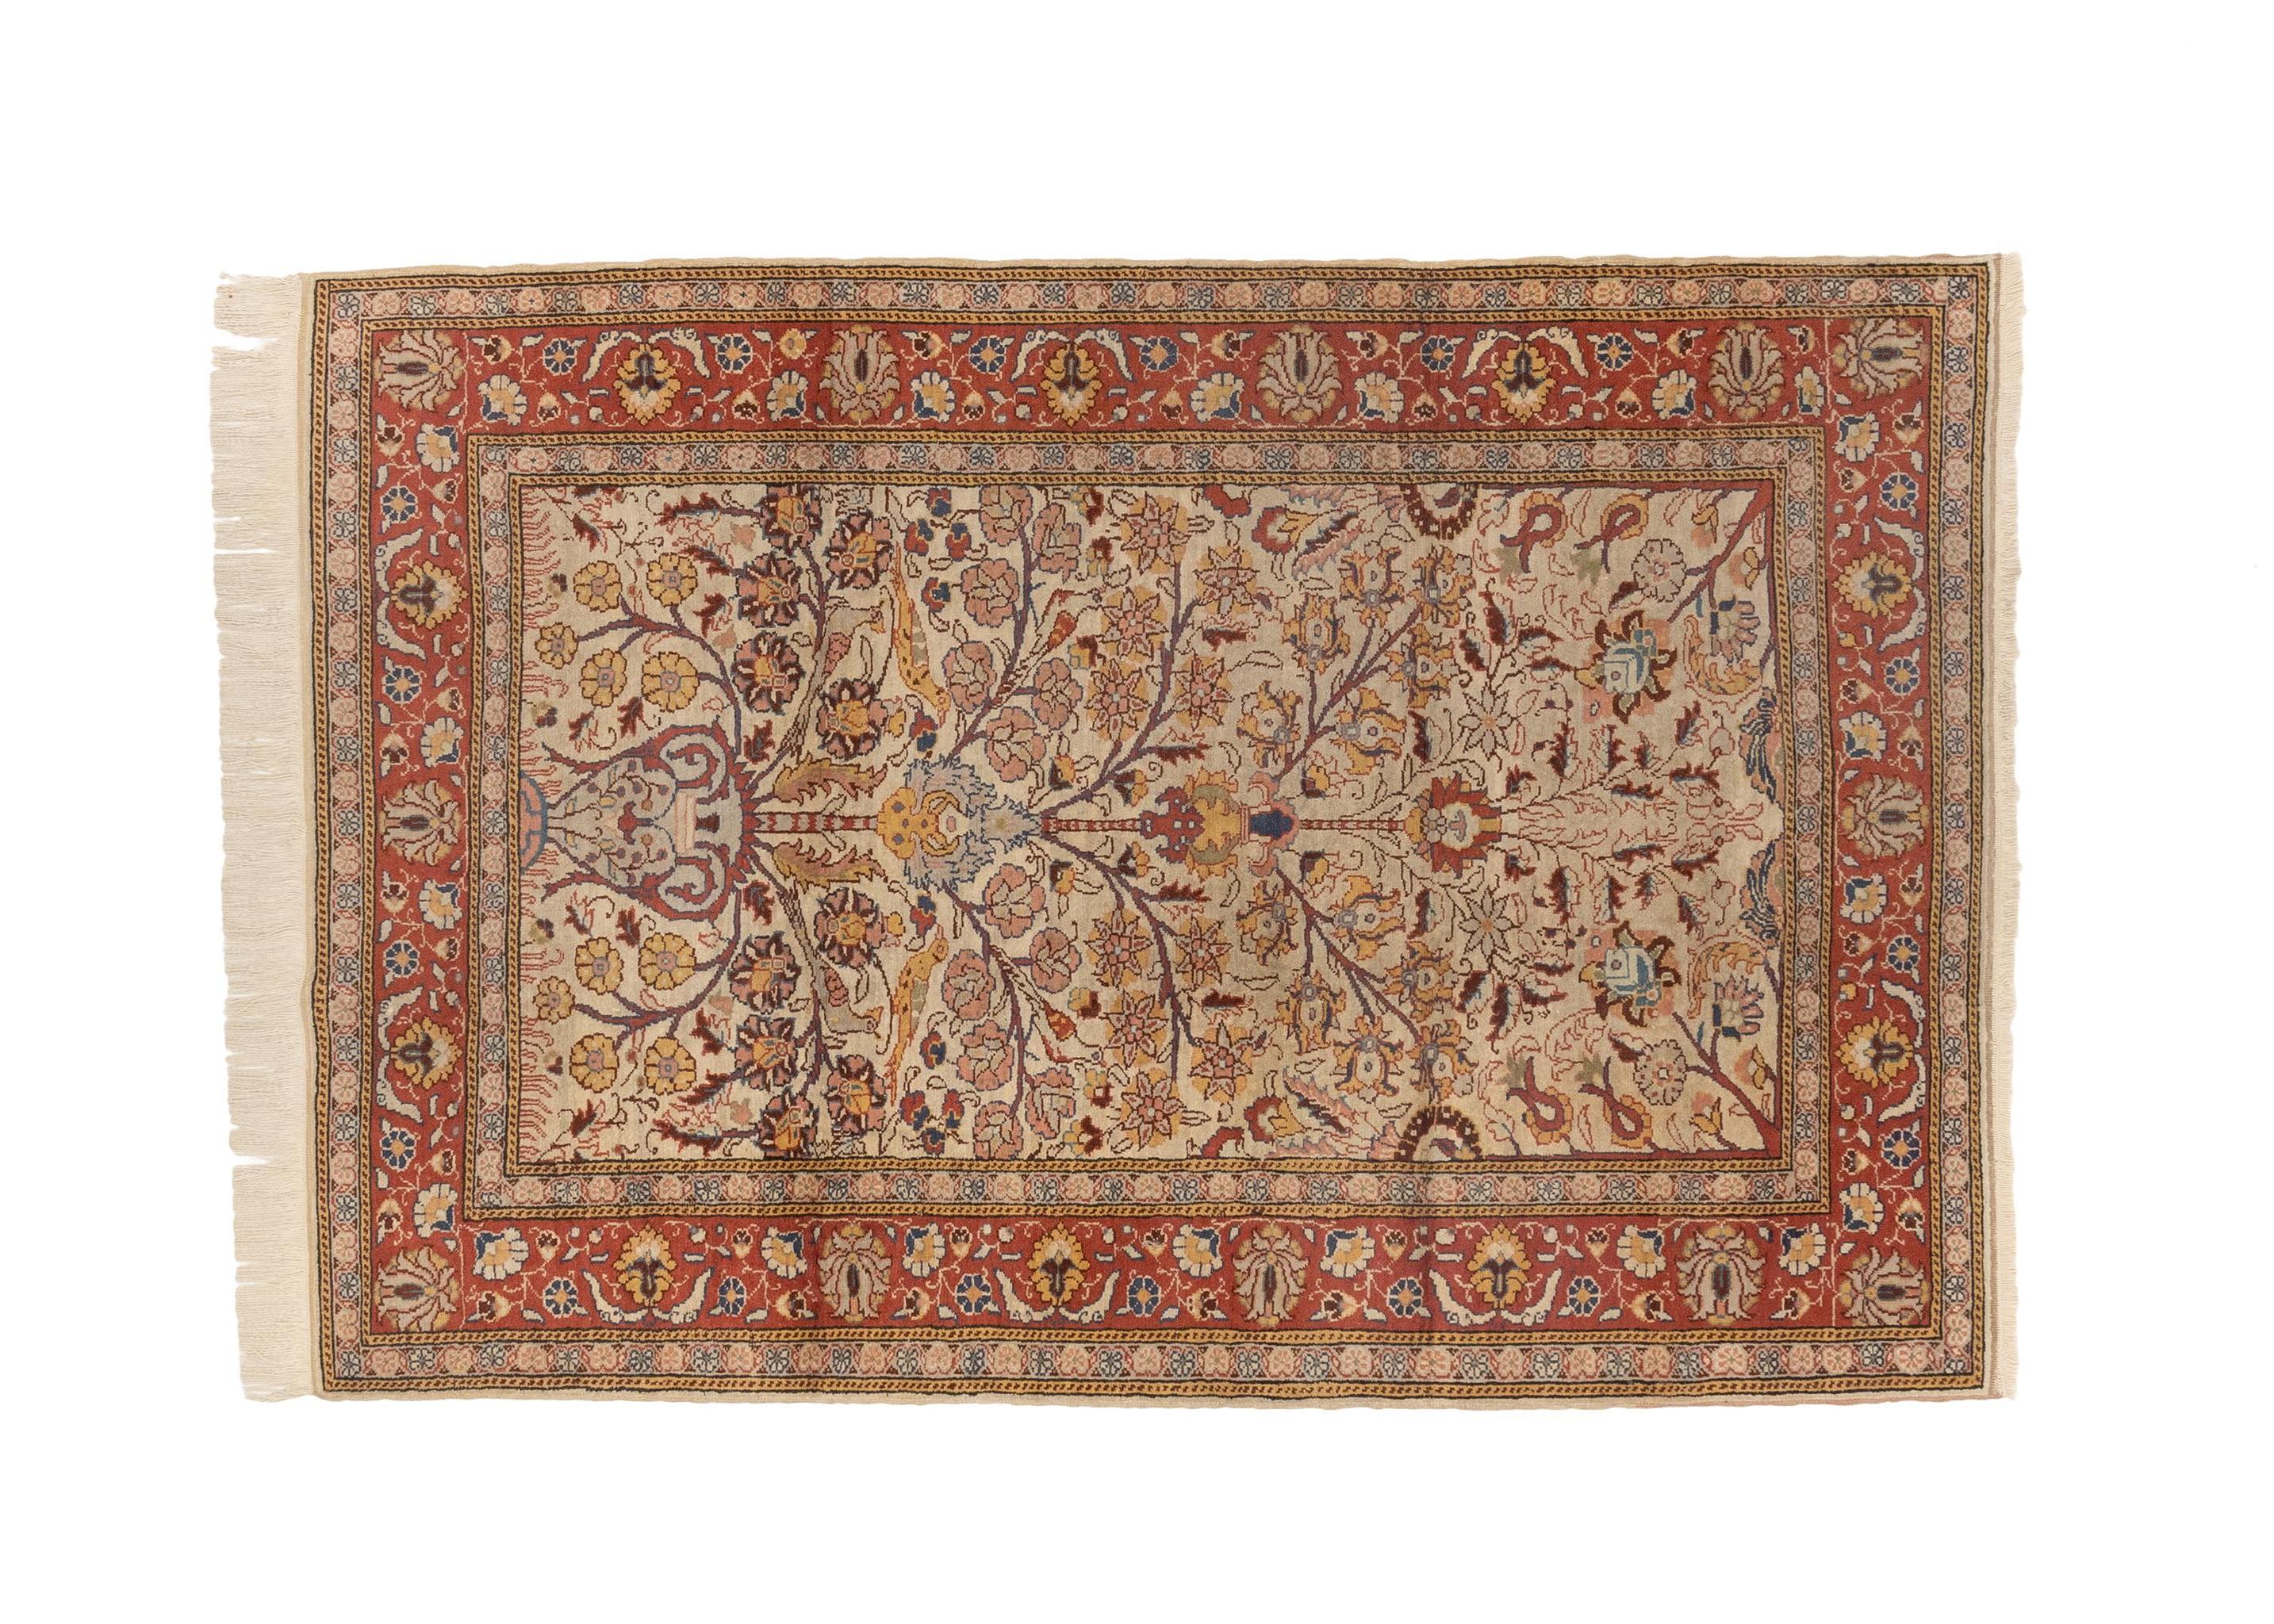 This vintage Turkish handmade silk rug from the 1920s is a true masterpiece of craftsmanship and artistry. It is a luxurious and meticulously woven piece that reflects the rich cultural heritage of Turkey and the skillful techniques passed down